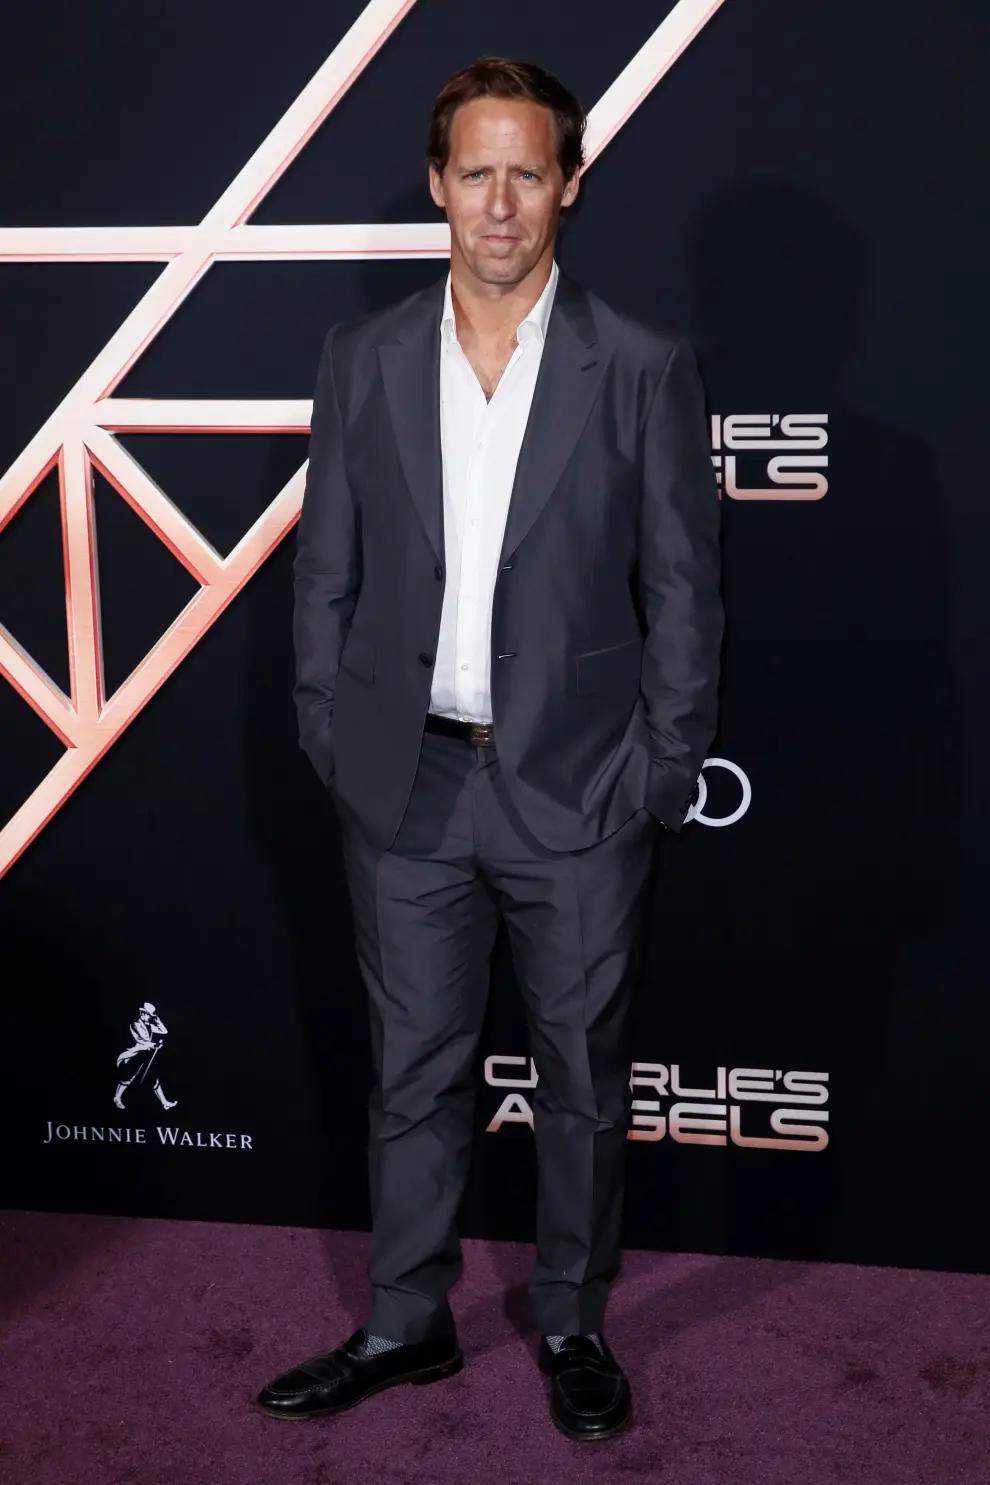 Los Angeles (United States), 12/11/2019.- US actor Nat Faxon poses on the red carpet during the premiere of 'Charlie's Angels' at the Westwood Regency Theater in Los Angeles, California, USA, 11 November 2019. The movie is to be released in US theaters on 15 November. (Cine, Estados Unidos) EFE/EPA/ETIENNE LAURENT Charlie's Angels premiere in Los Angeles